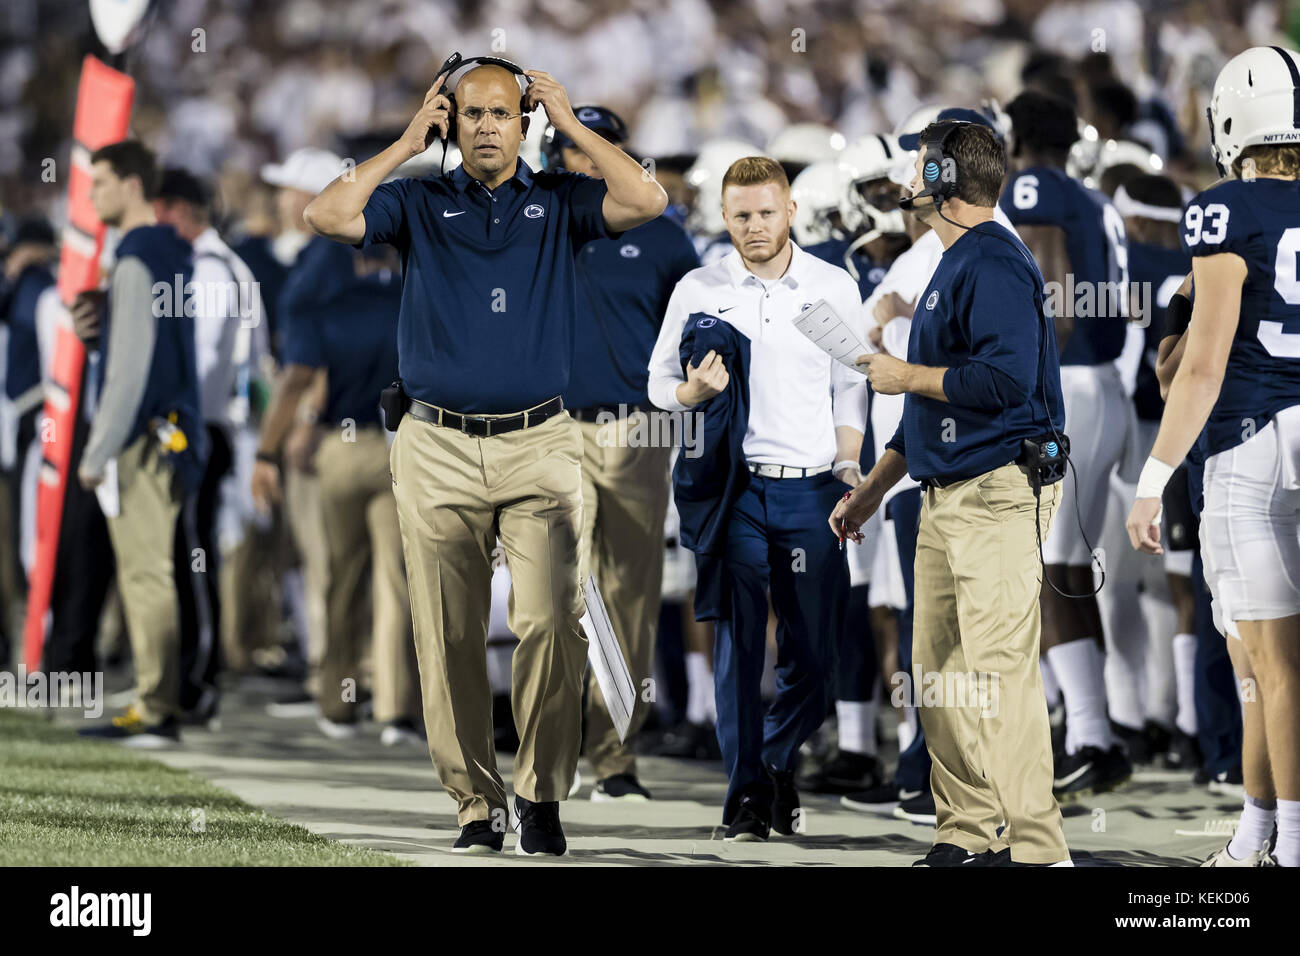 University Park, Pennsylvania, USA. 21st Oct, 2017. October 21, 2017: Penn State Nittany Lions head coach James Franklin during the NCAA football game between the Michigan Wolverines and the Penn State Nittany Lions at Beaver Stadium in University Park, Pennsylvania. Credit: Scott Taetsch/ZUMA Wire/Alamy Live News Stock Photo